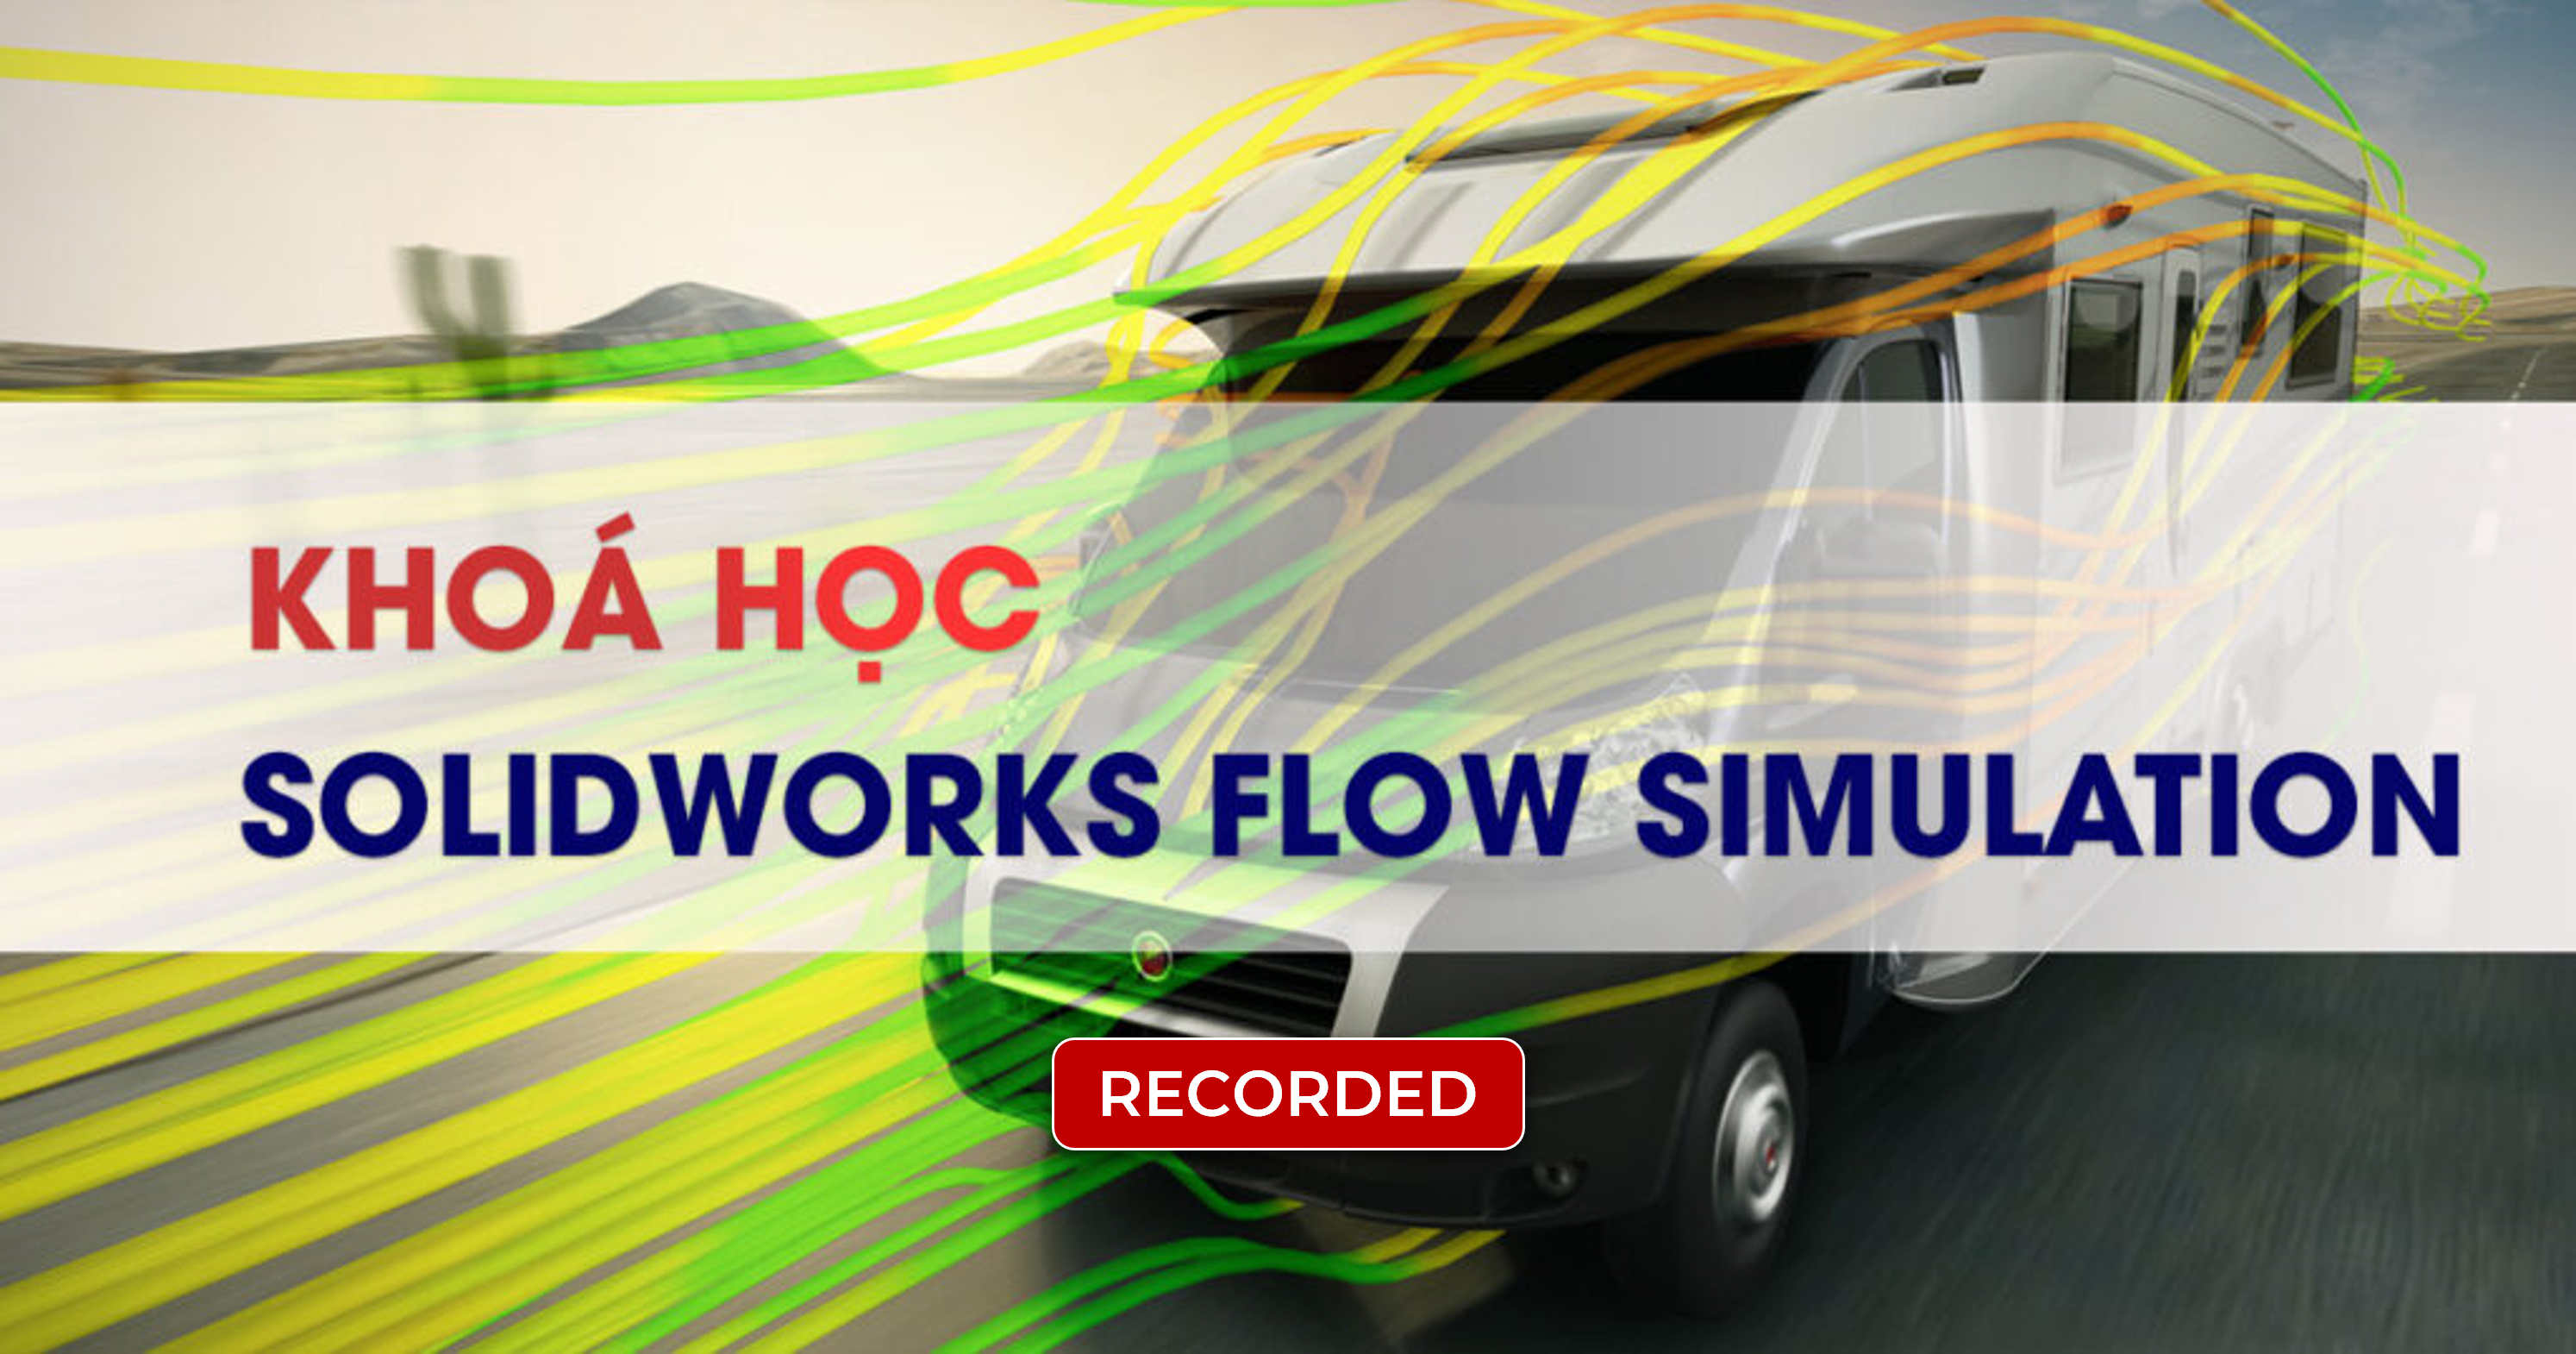 RECORD – SOLIDWORKS FLOW SIMULATION